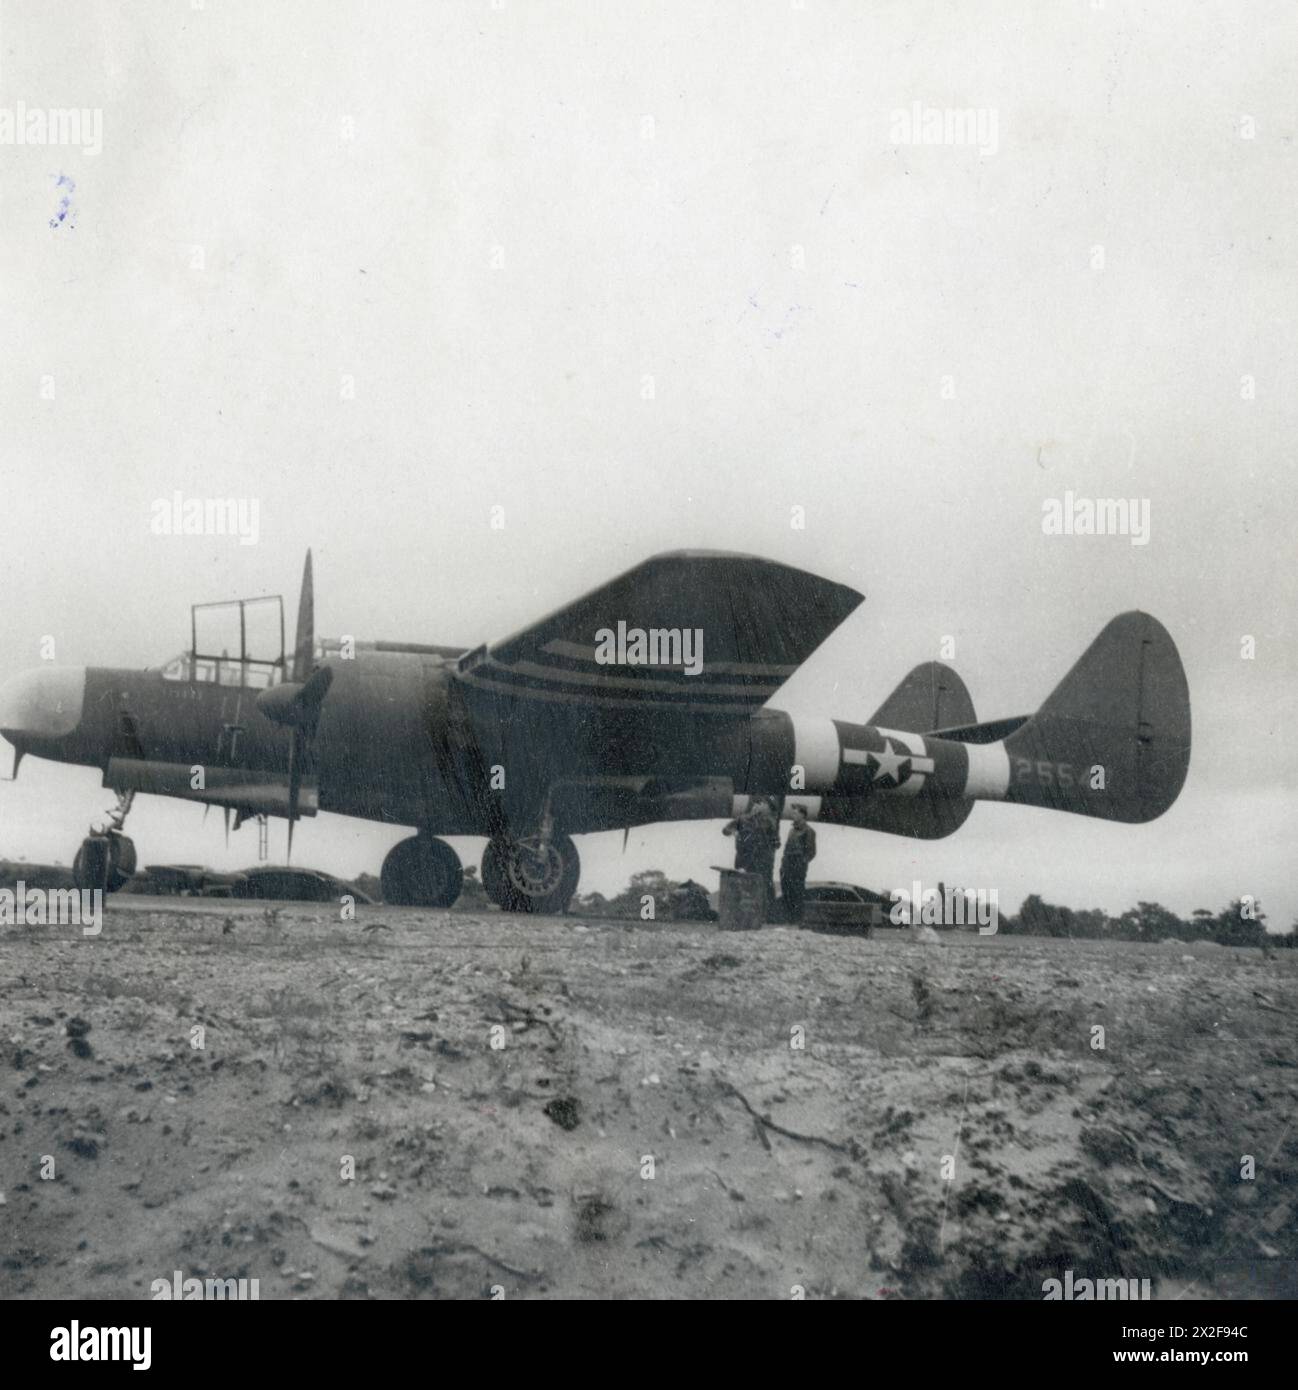 UNITED STATES ARMY AIR FORCES (USAAF) IN BRITAIN, 1942-1945 - A P-61 Black Widow (serial number 42-5547) of the 422nd Night Fighter Squadron.Image stamped on reverse: 'Keystone Press.'[stamp], 'Not to be published 24 Jul 1944.' [stamp], 'Passed for publication 24 Aug 1944.' [stamp] and '342471.' [Censor no]Printed caption on reverse: 'Newest Night Fighter Is Called The 'Black Widow'. The very latest nght fighter, the P-61, known as the 'Black Widow', has commenced operations. This powerful plane is driven by two 2,000 h.p. Pratt and Whitney motors and is armed with cannons. It looks very much Stock Photo